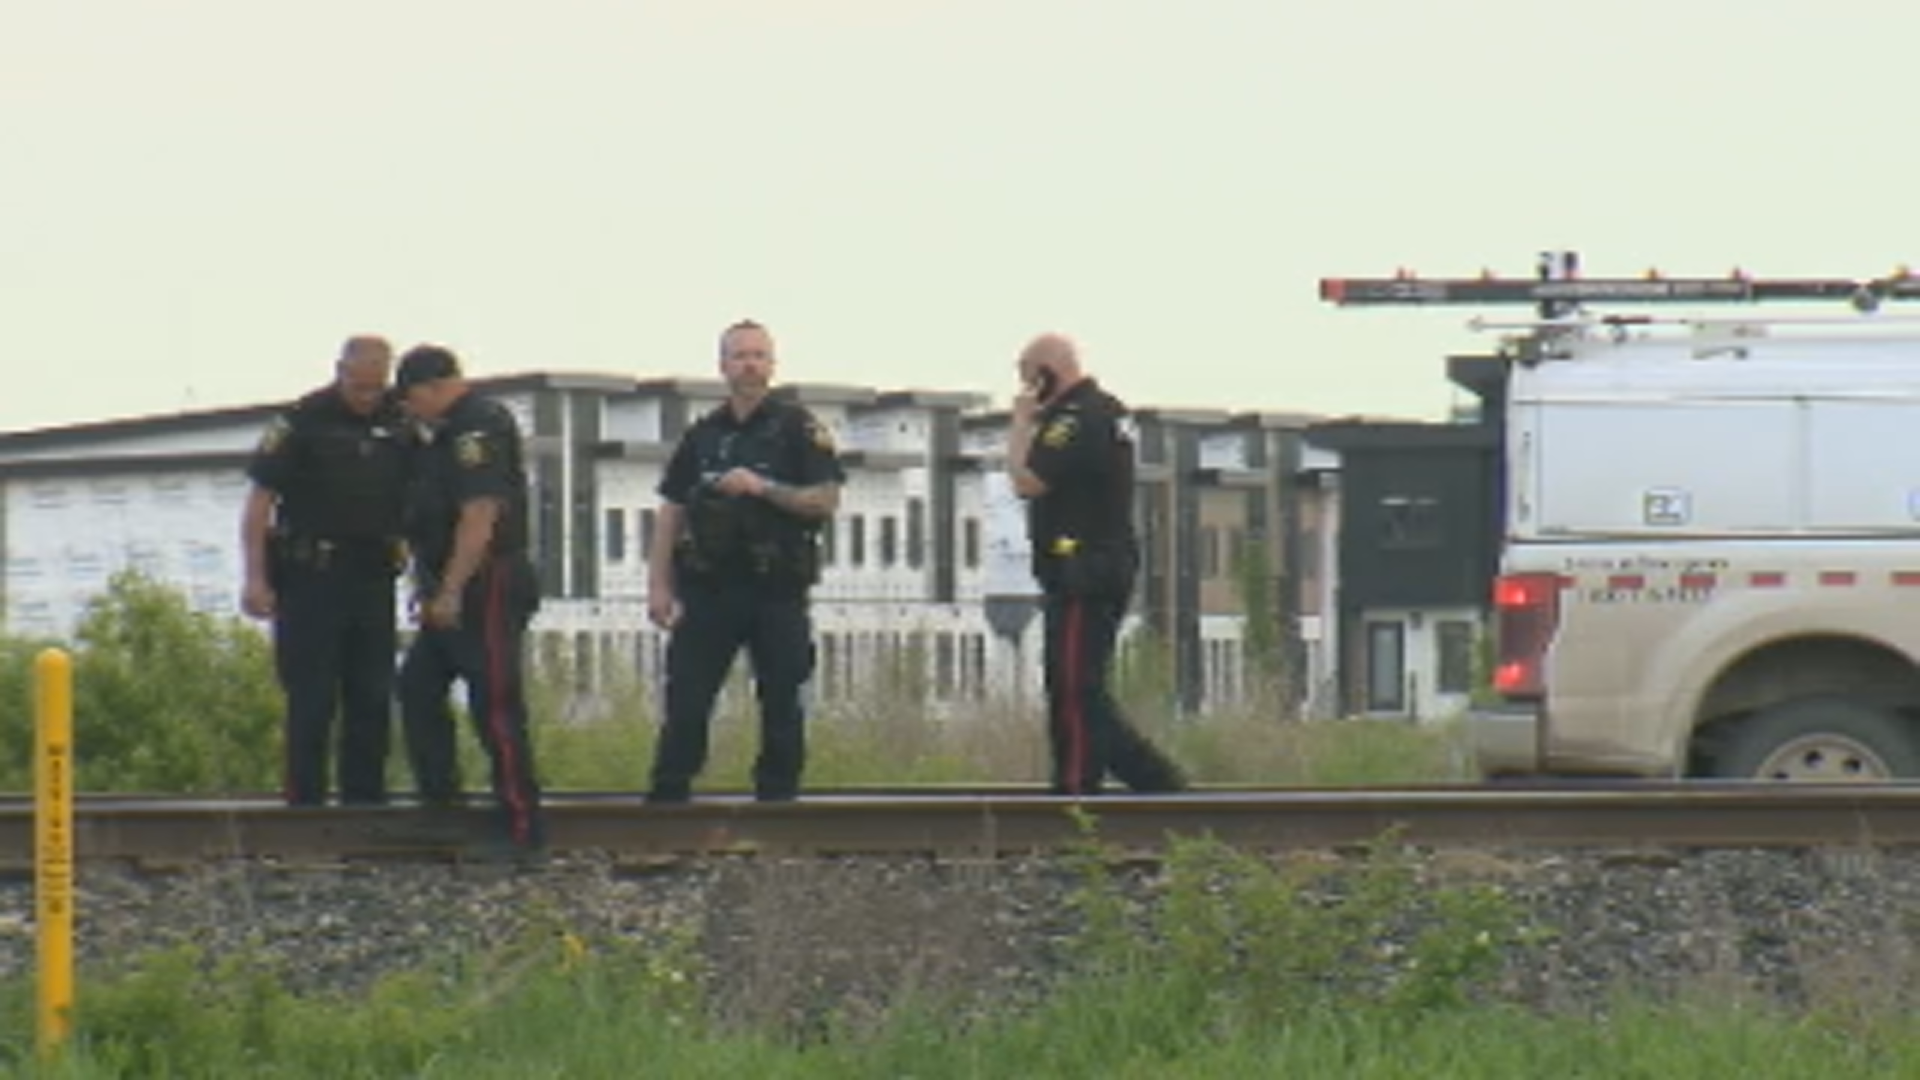 One person in hospital after being hit by train in Transcona